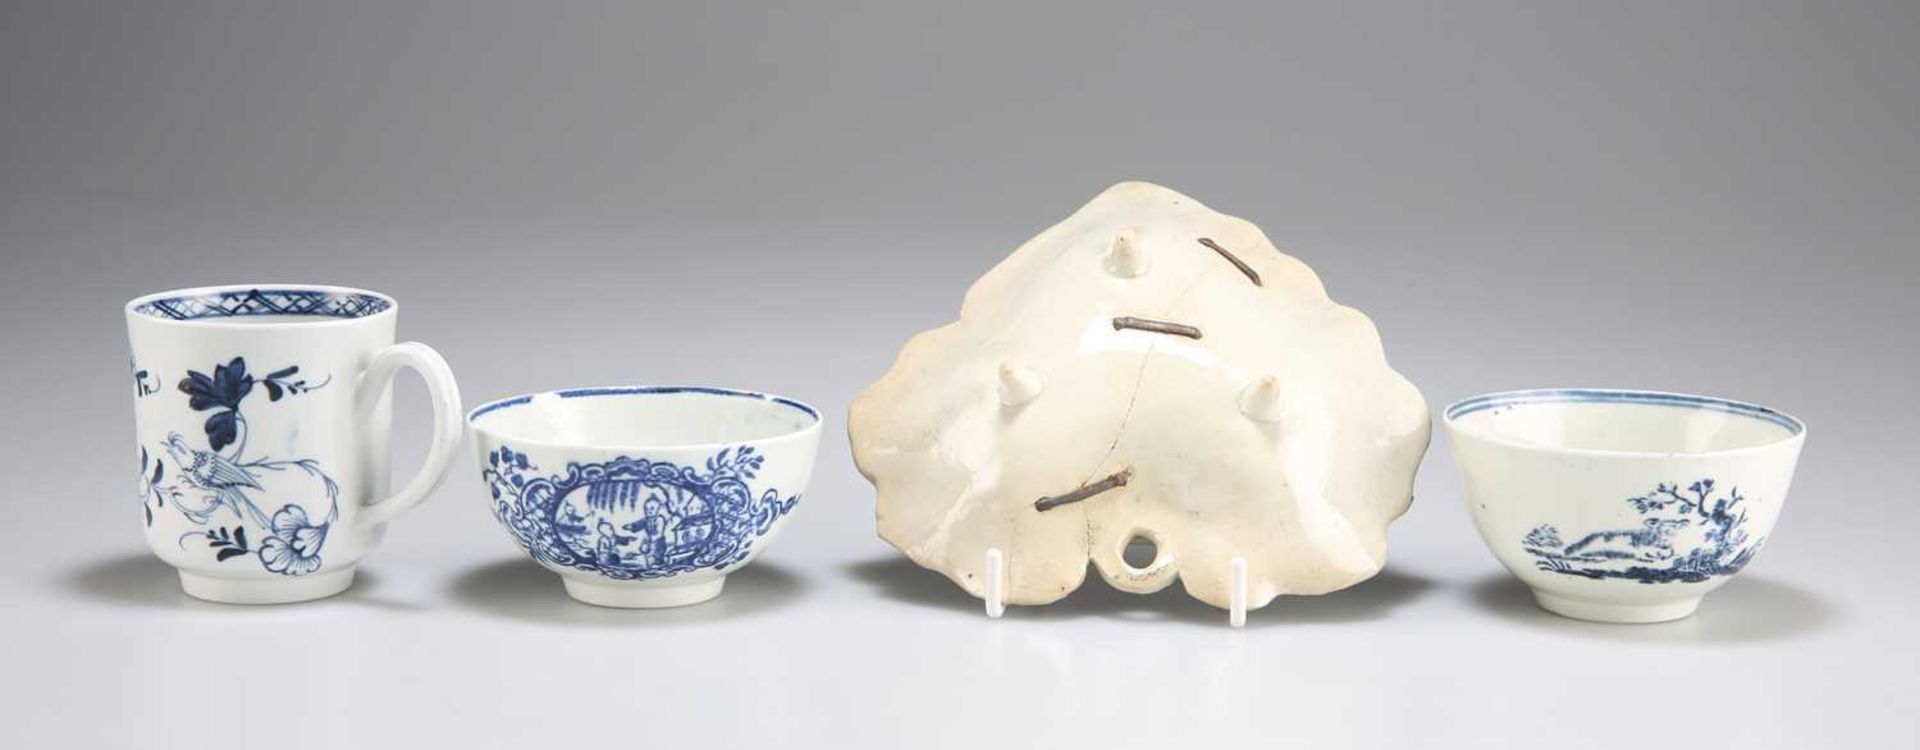 FOUR PIECES OF LIVERPOOL BLUE AND WHITE PORCELAIN - Image 2 of 2